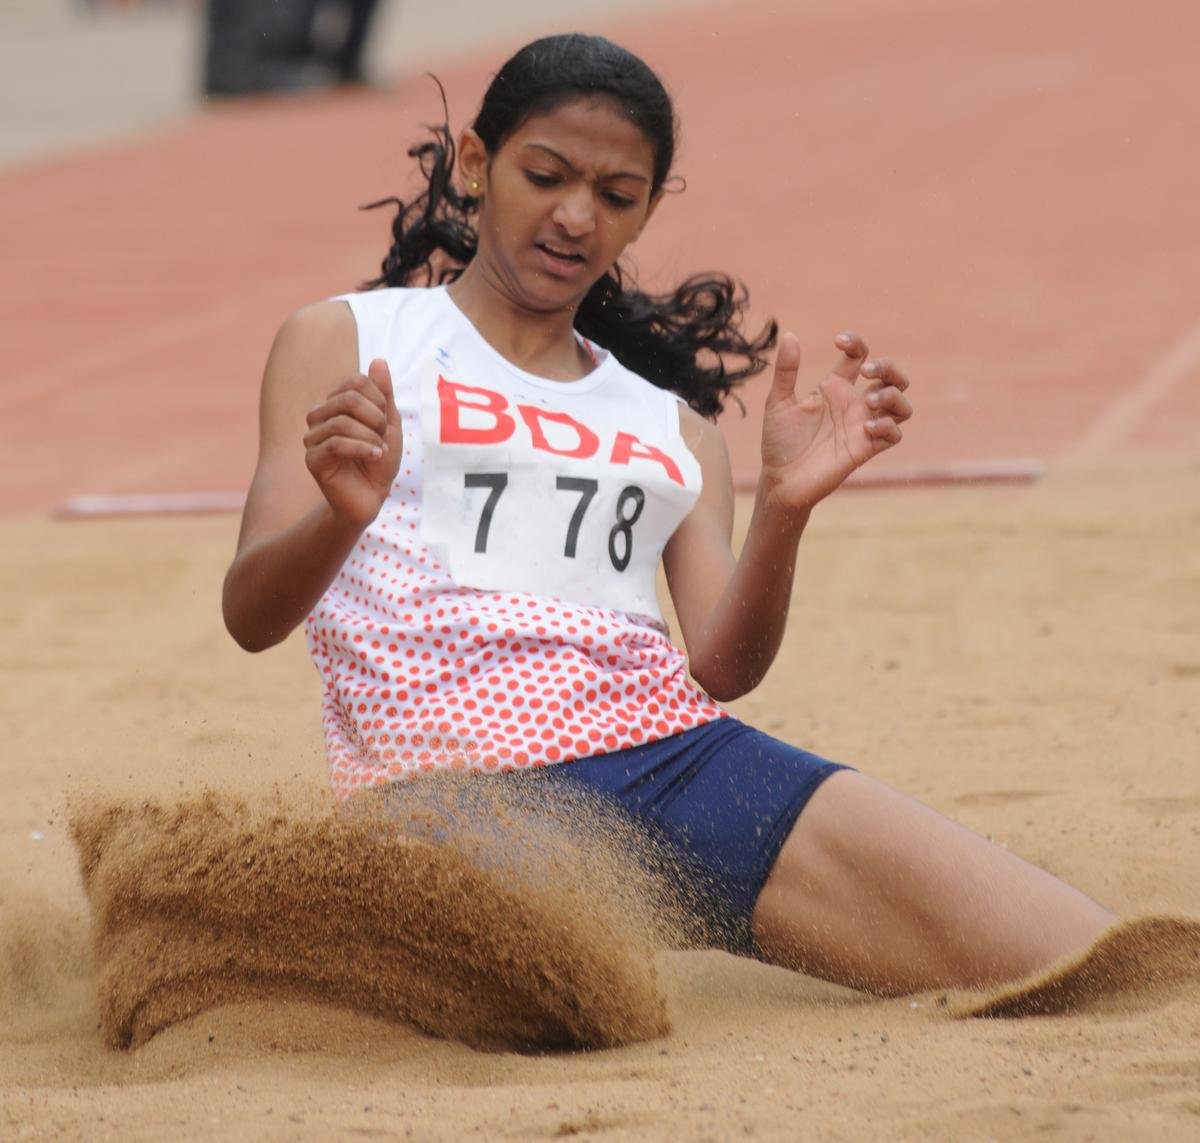 Kerala’s Nayana James, winner of the Girls’ under-16 long jump event, at the 26th National Junior and Sub-Junior Athletic Championships 2010 at Sree Kanteerava Stadium, in Bangalore on December 01, 2010.